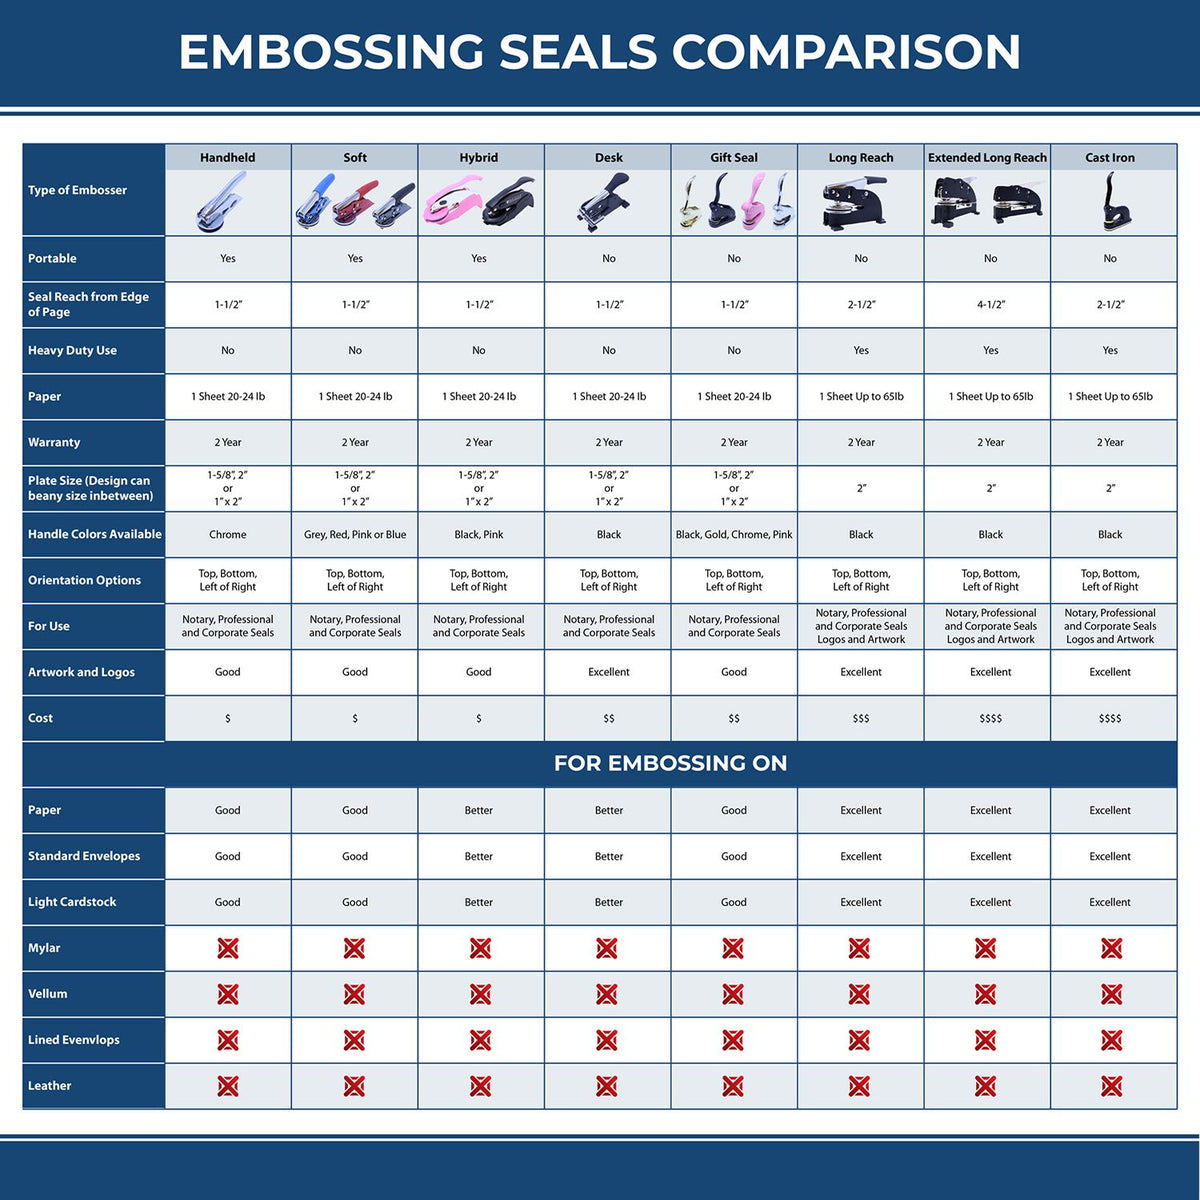 A comparison chart for the different types of mount models available for the State of Tennessee Extended Long Reach Geologist Seal